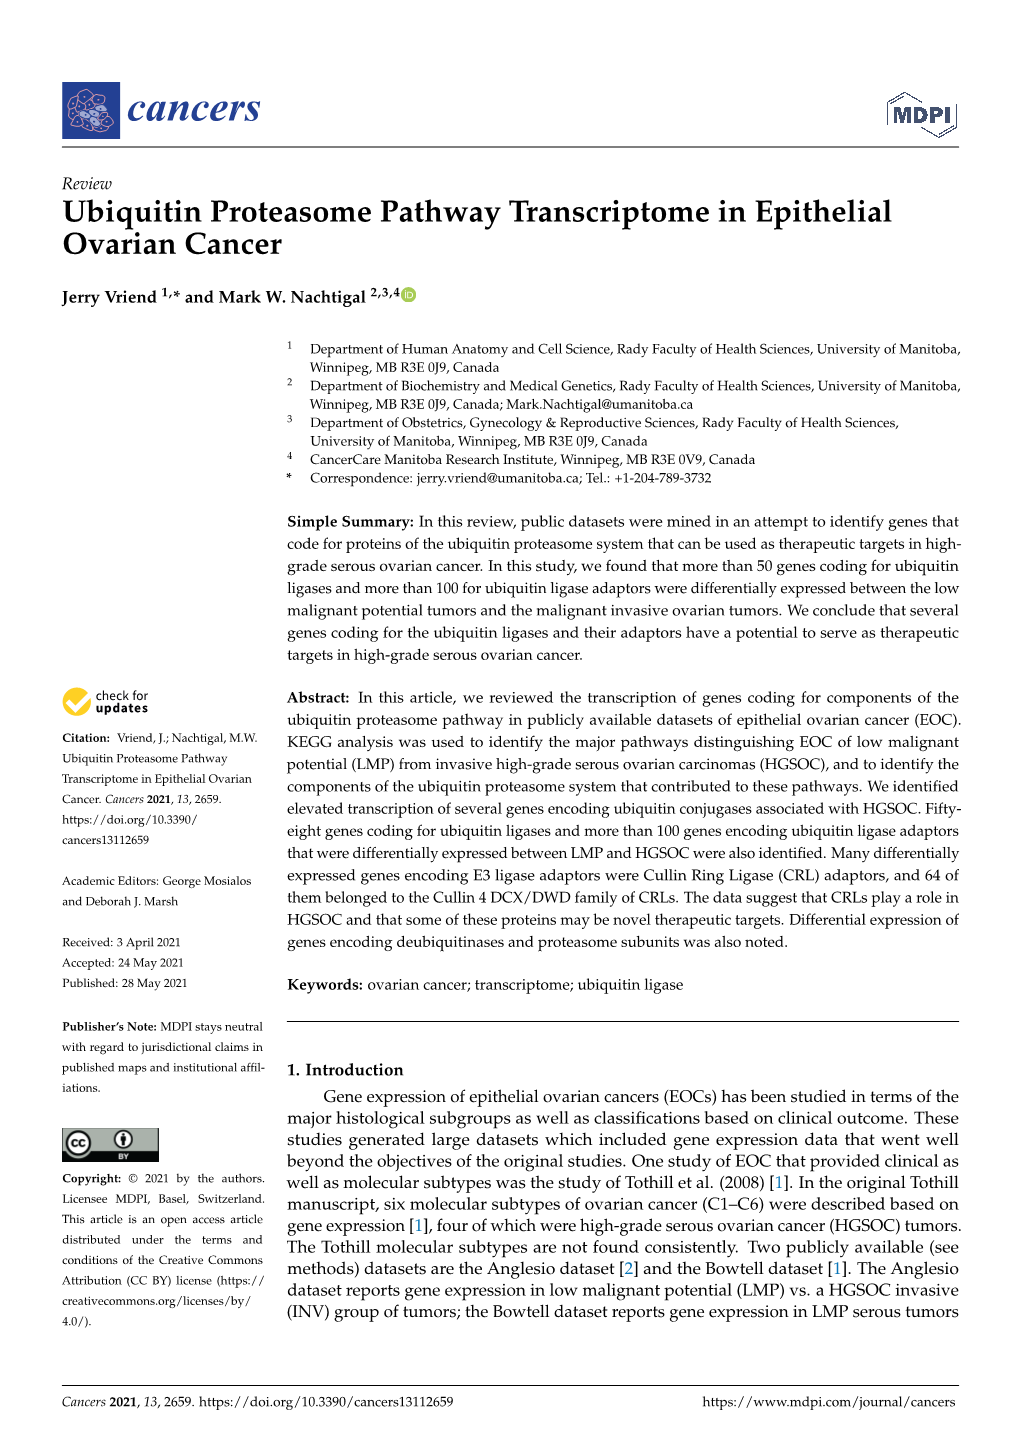 Ubiquitin Proteasome Pathway Transcriptome in Epithelial Ovarian Cancer